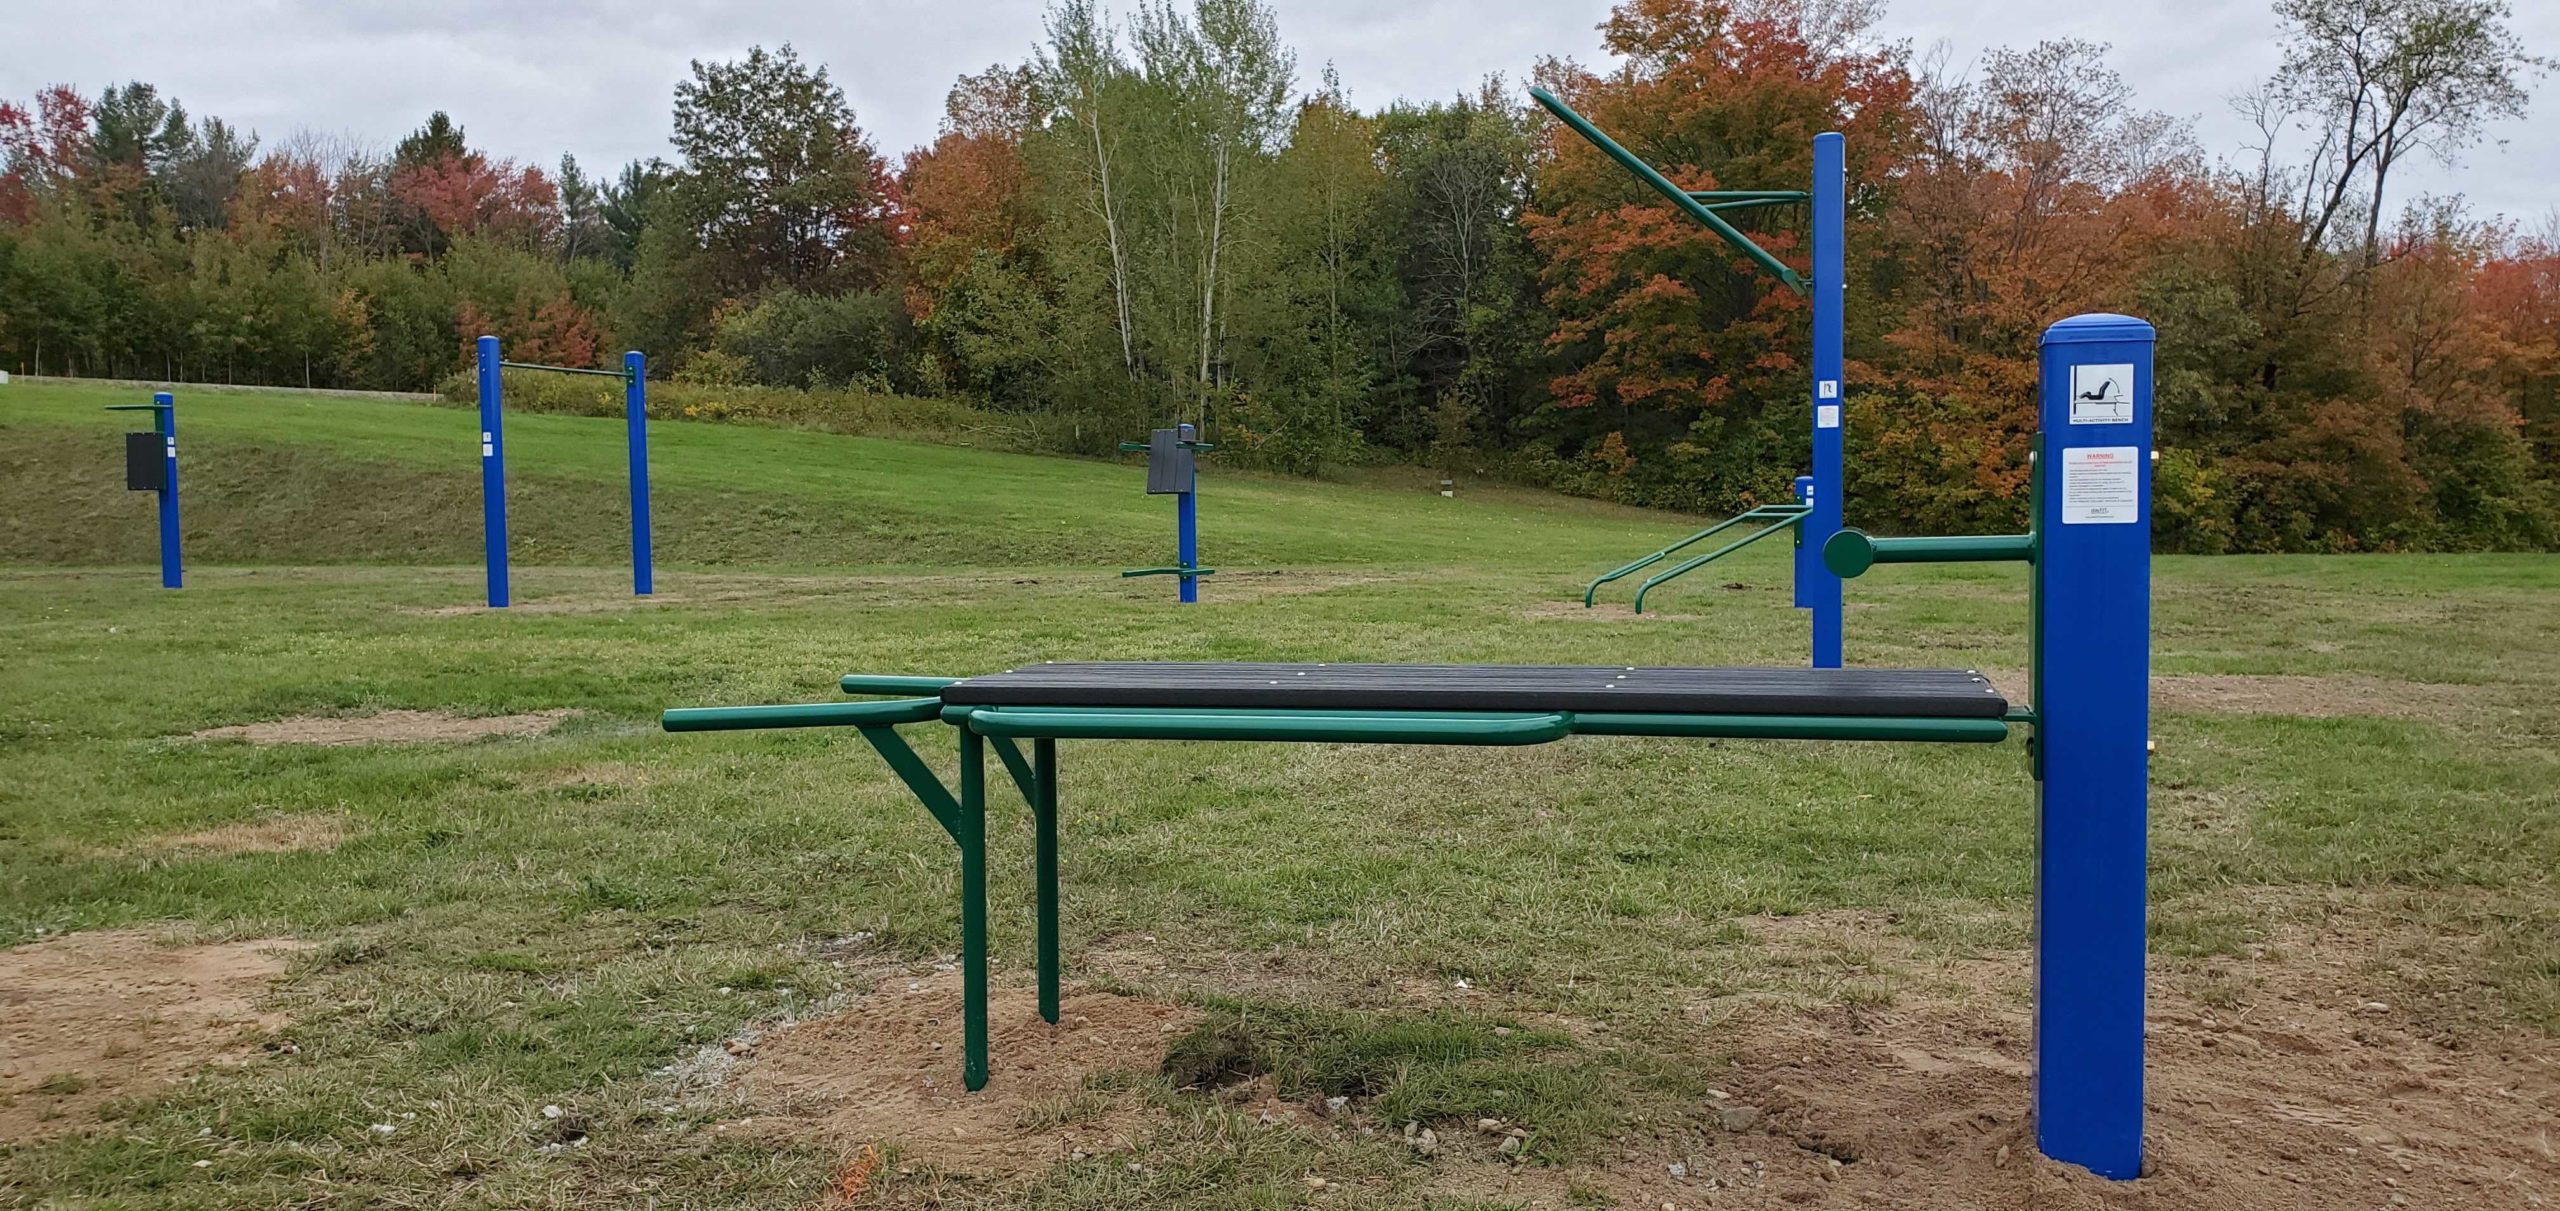 StayFit systems installation at Canadian Armed Forces Base 42